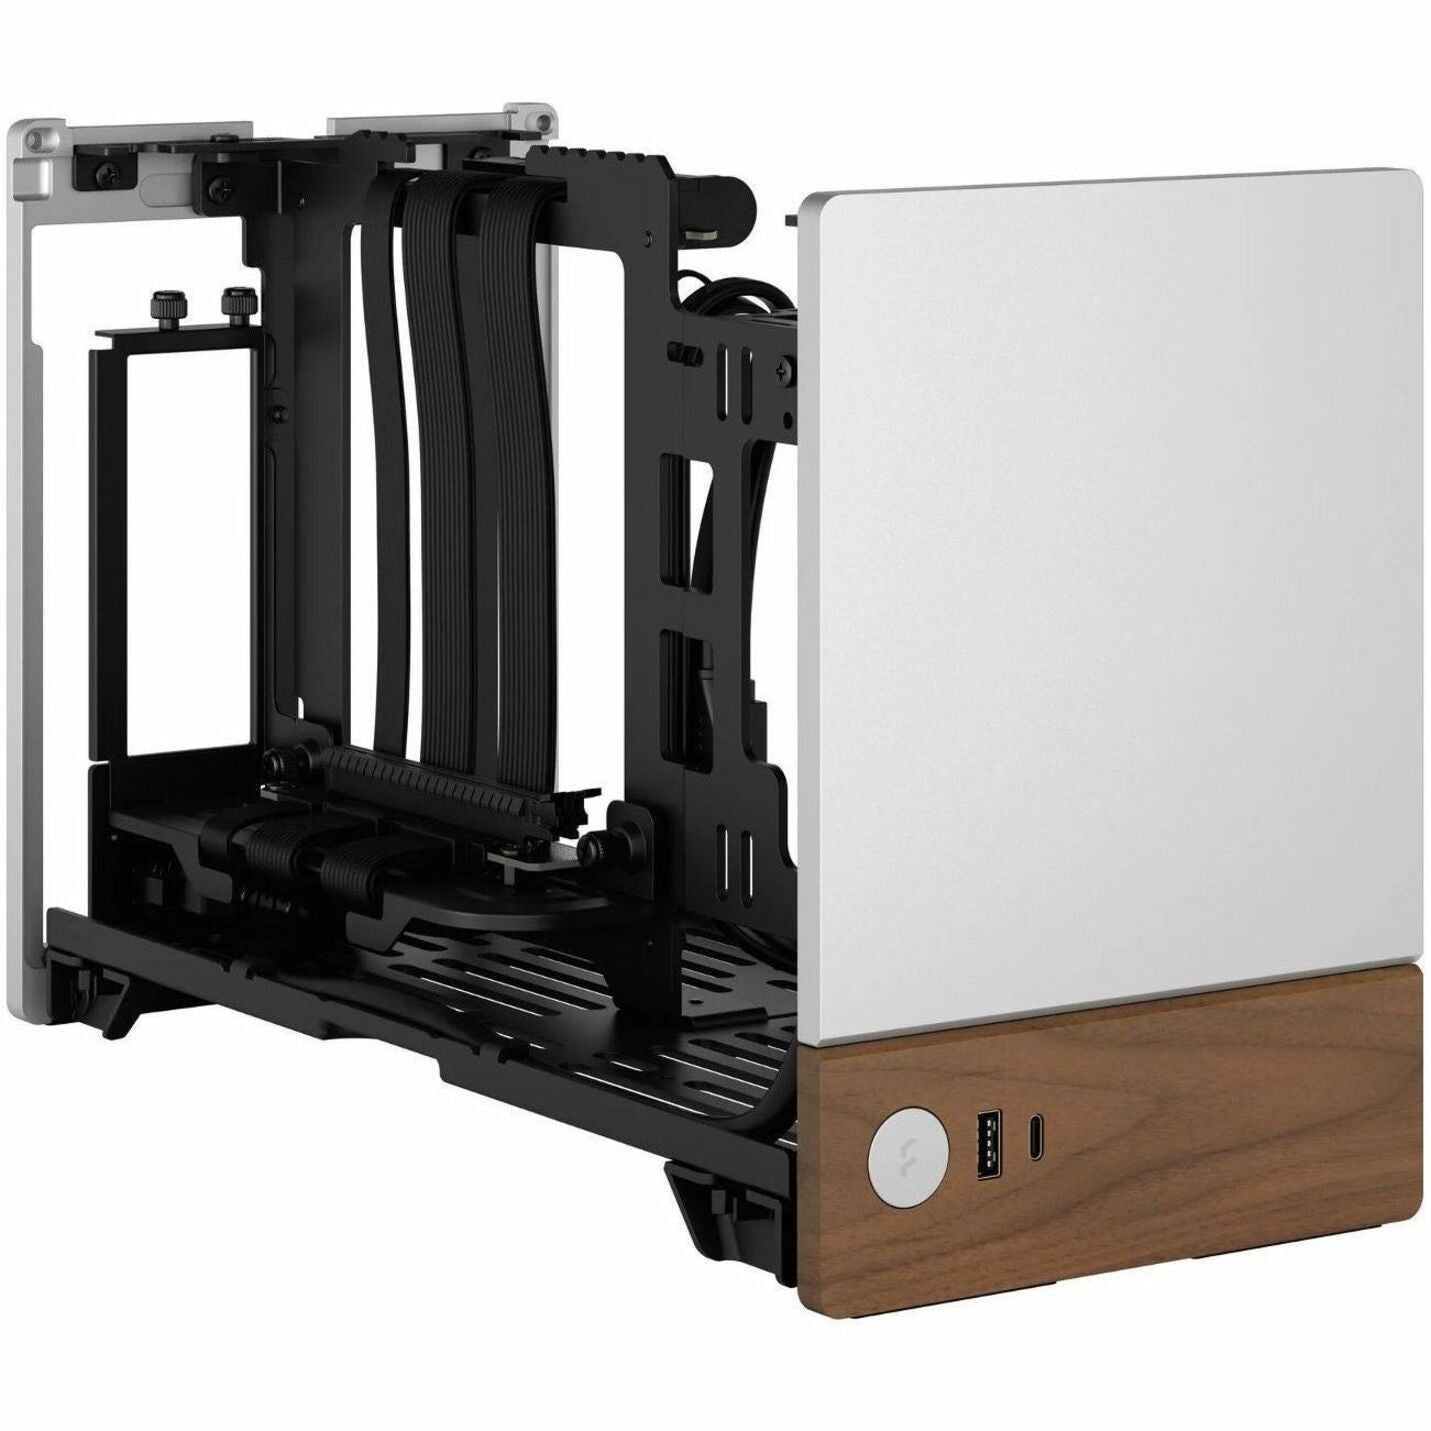 Fractal Design FD-C-TER1N-02 Terra Gaming Computer Case, Small Form Factor, Silver, Anodized Aluminum